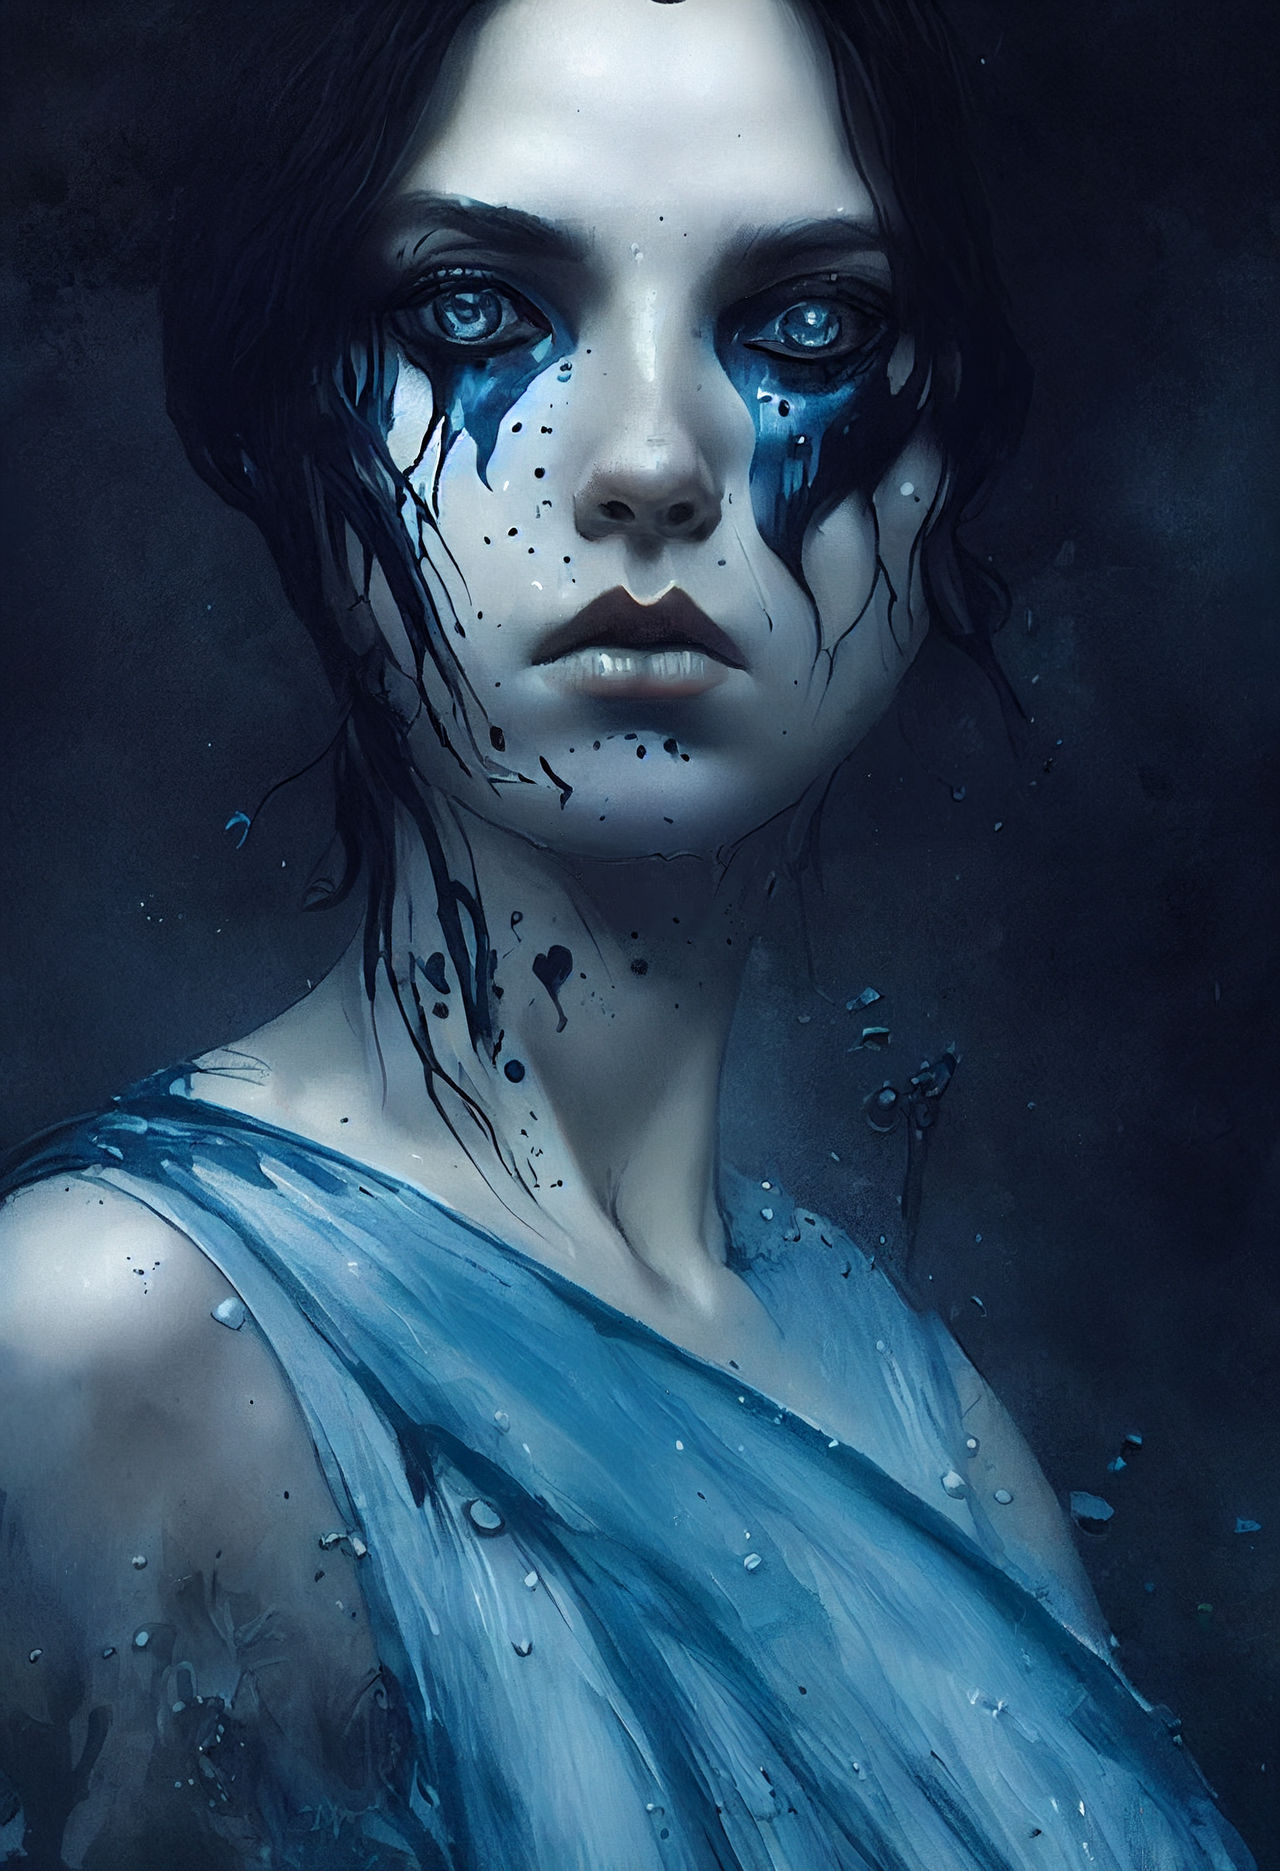 Torn Tears by NateKeith on DeviantArt